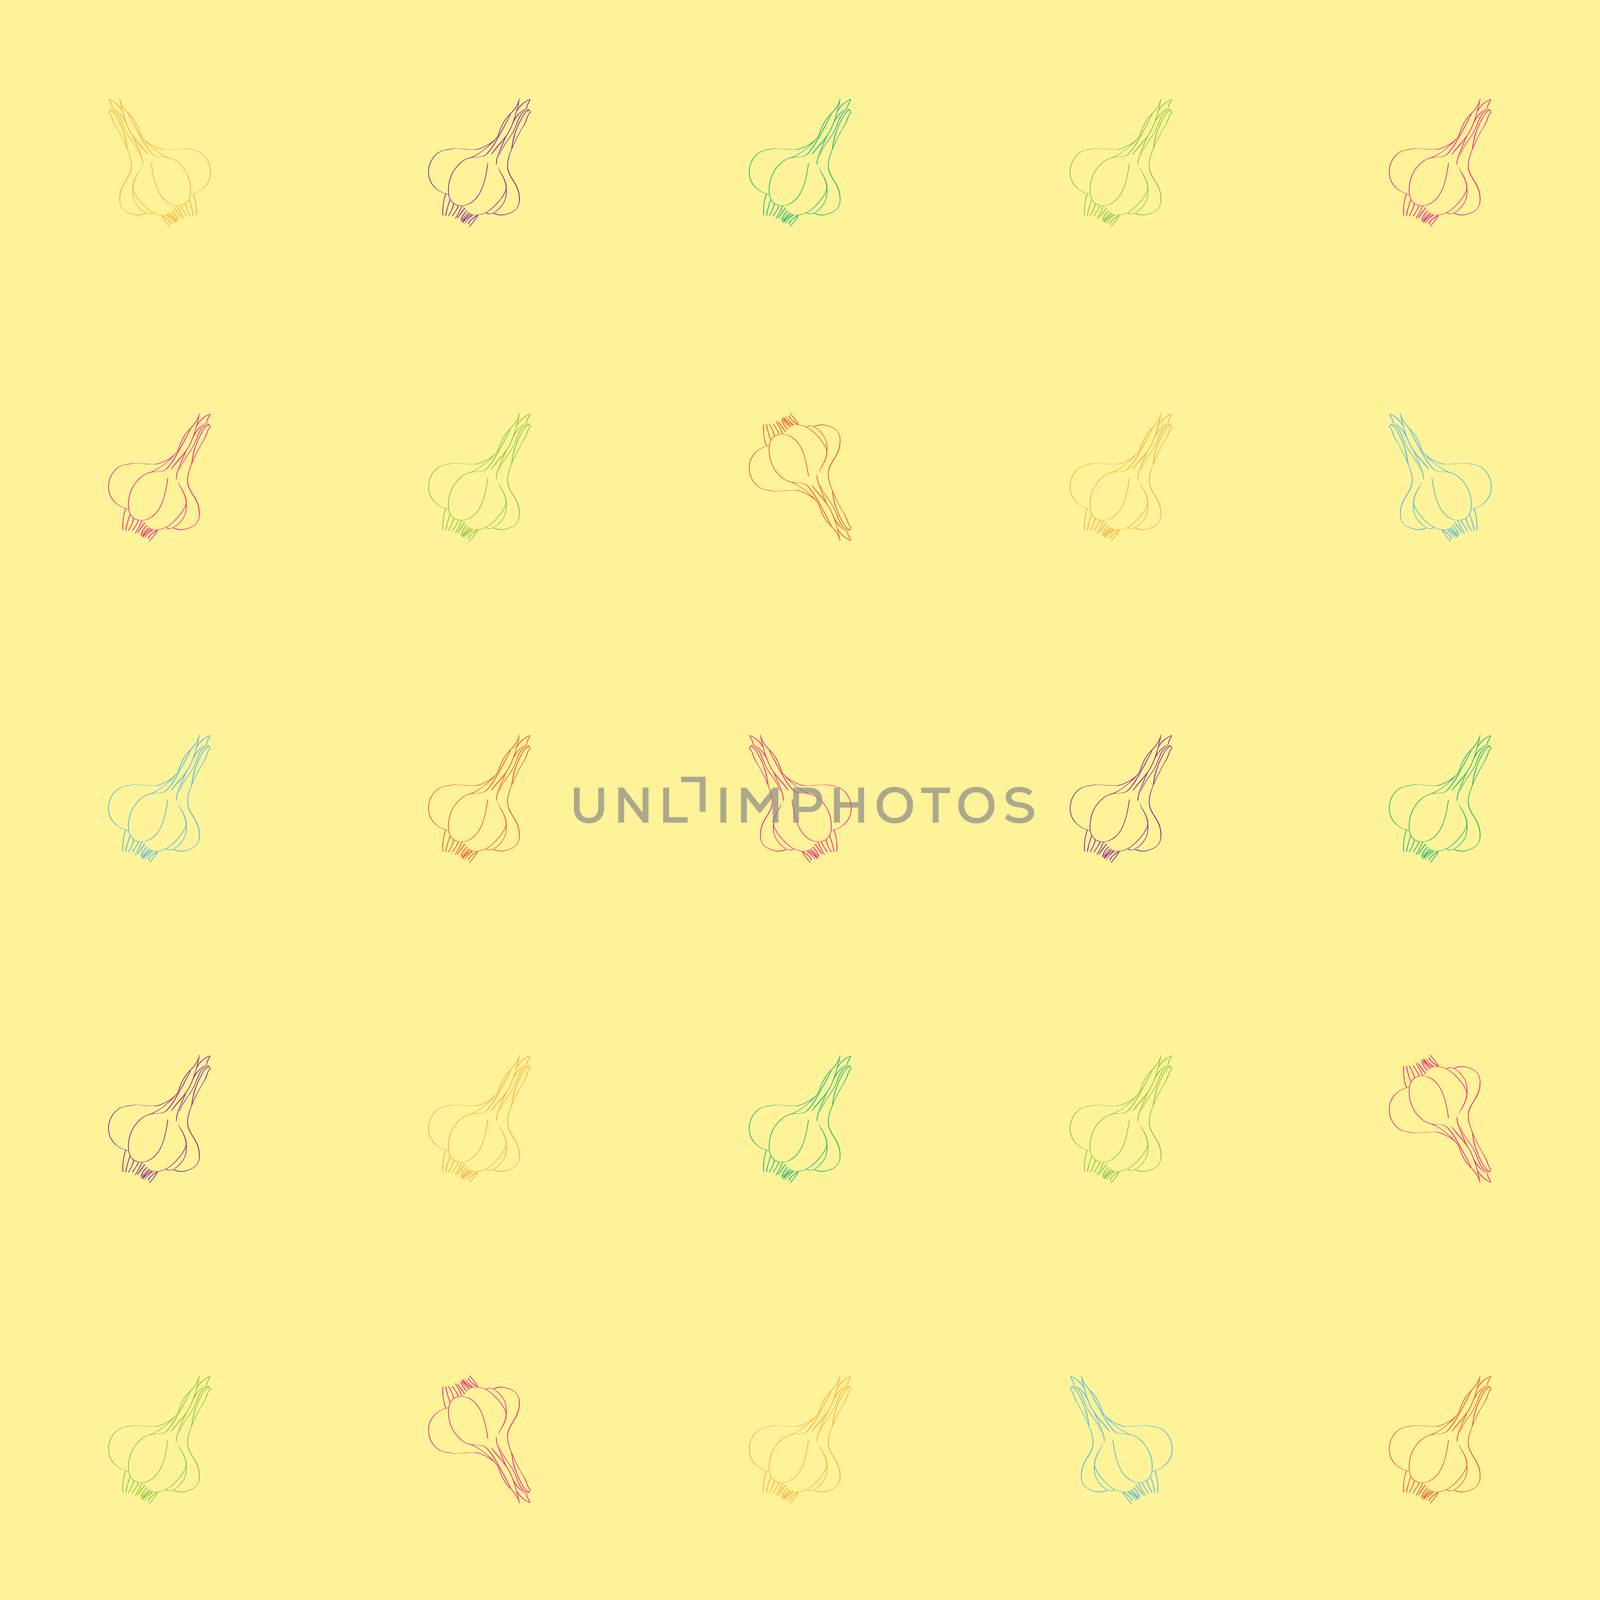 Seamless pattern with garlic, doodle illustration of multicolored cloves over a yellow background